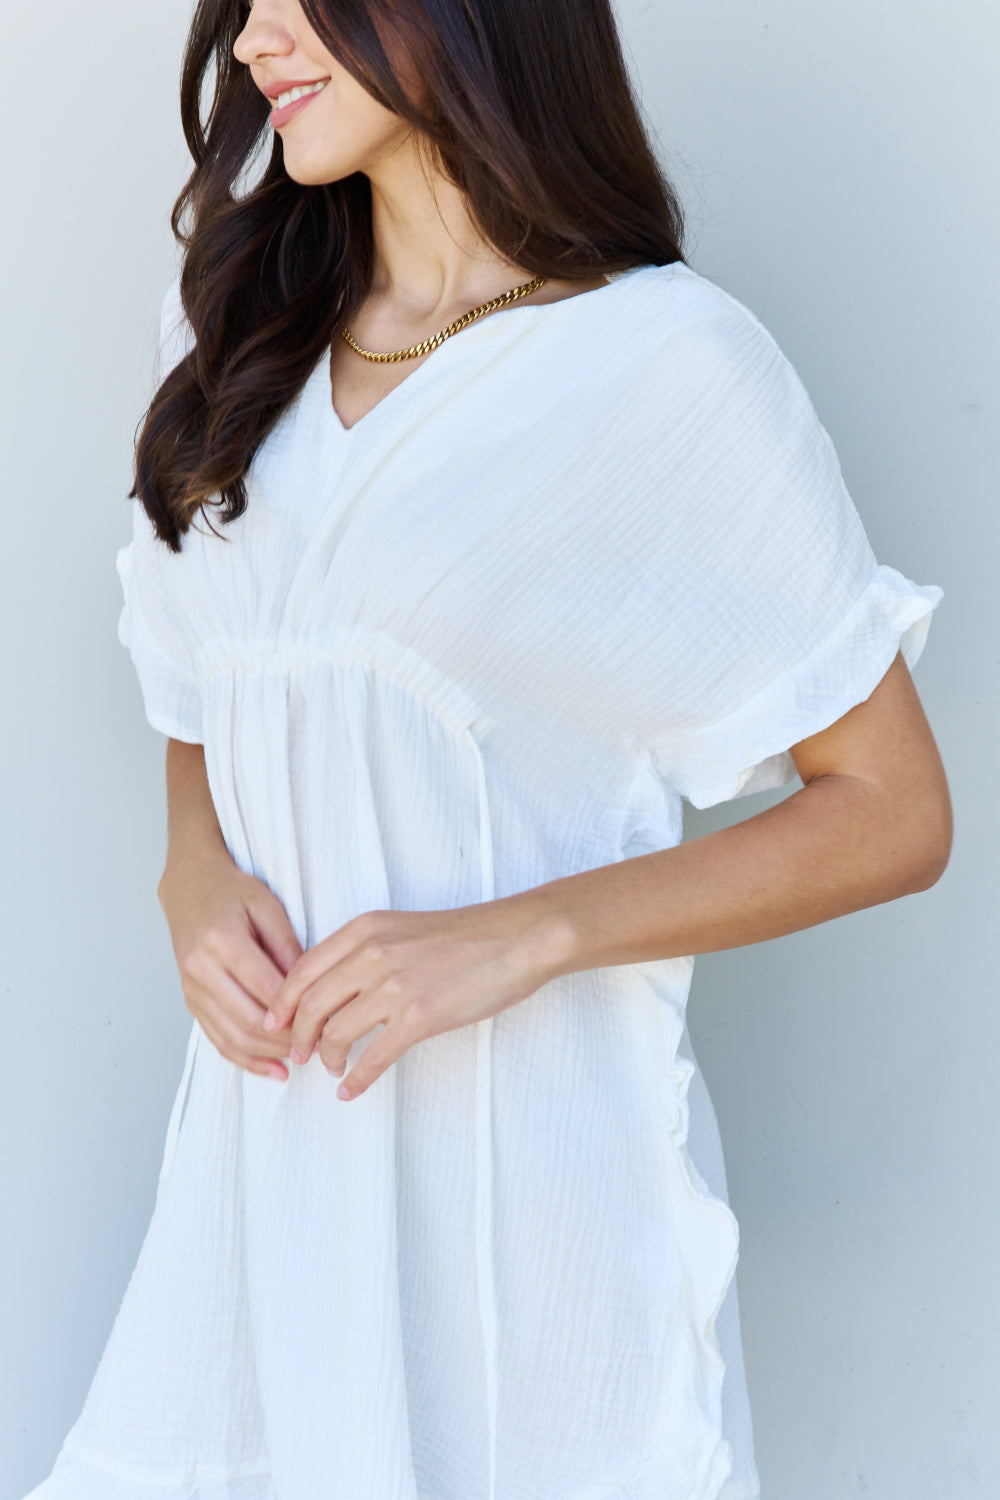 Ninexis Out Of Time Full Size Ruffle Hem Dress with Drawstring Waistband in White - Tigbul's Fashion